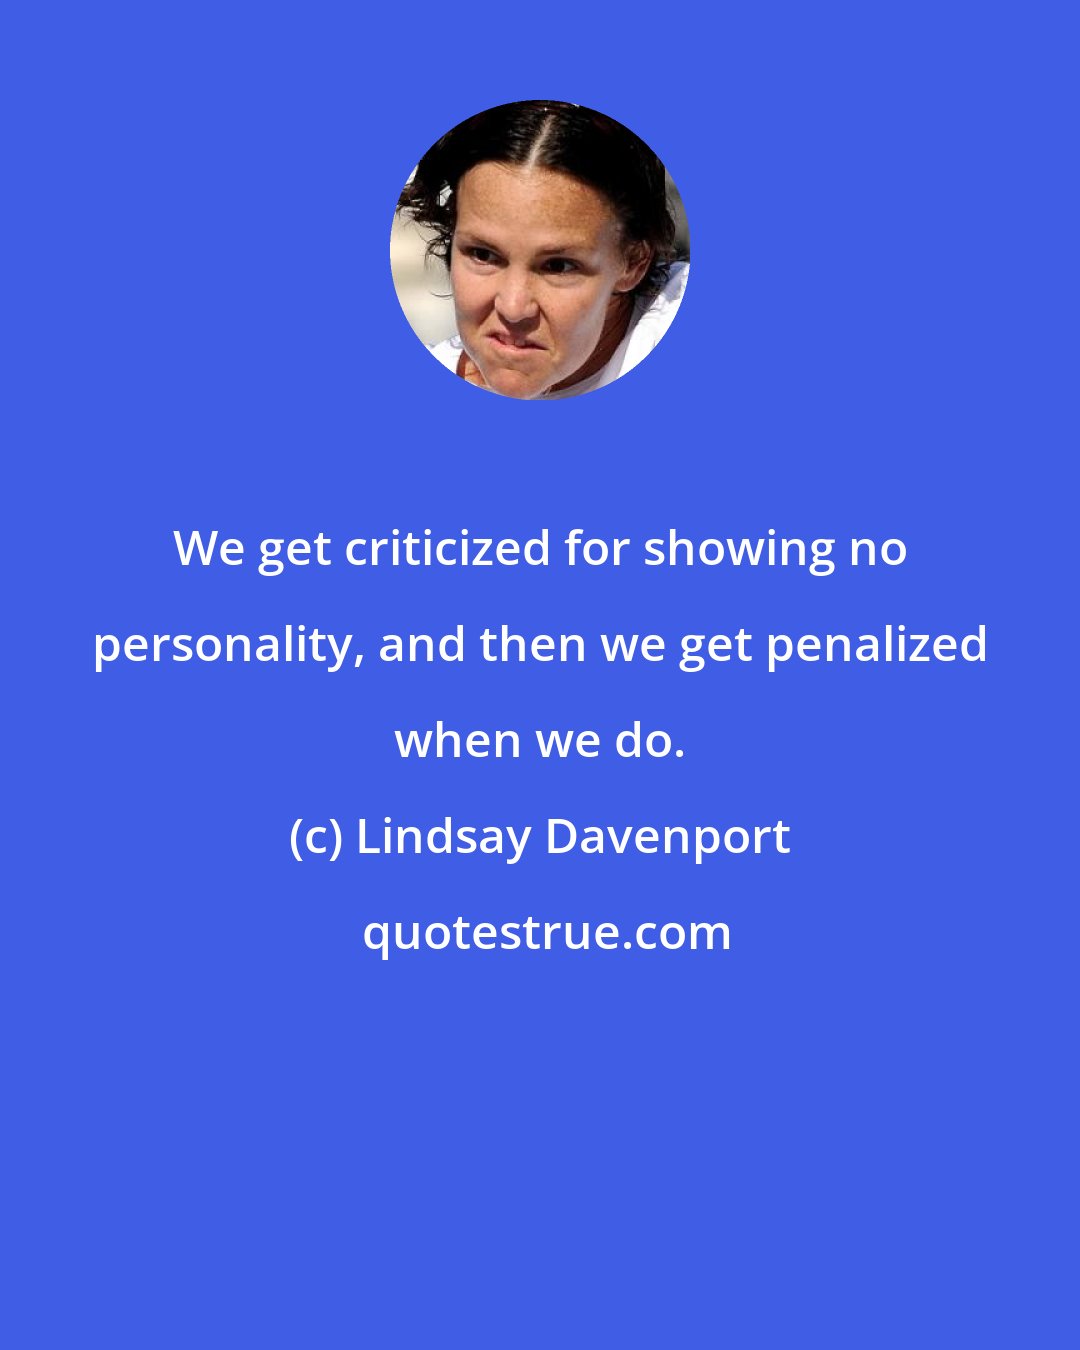 Lindsay Davenport: We get criticized for showing no personality, and then we get penalized when we do.